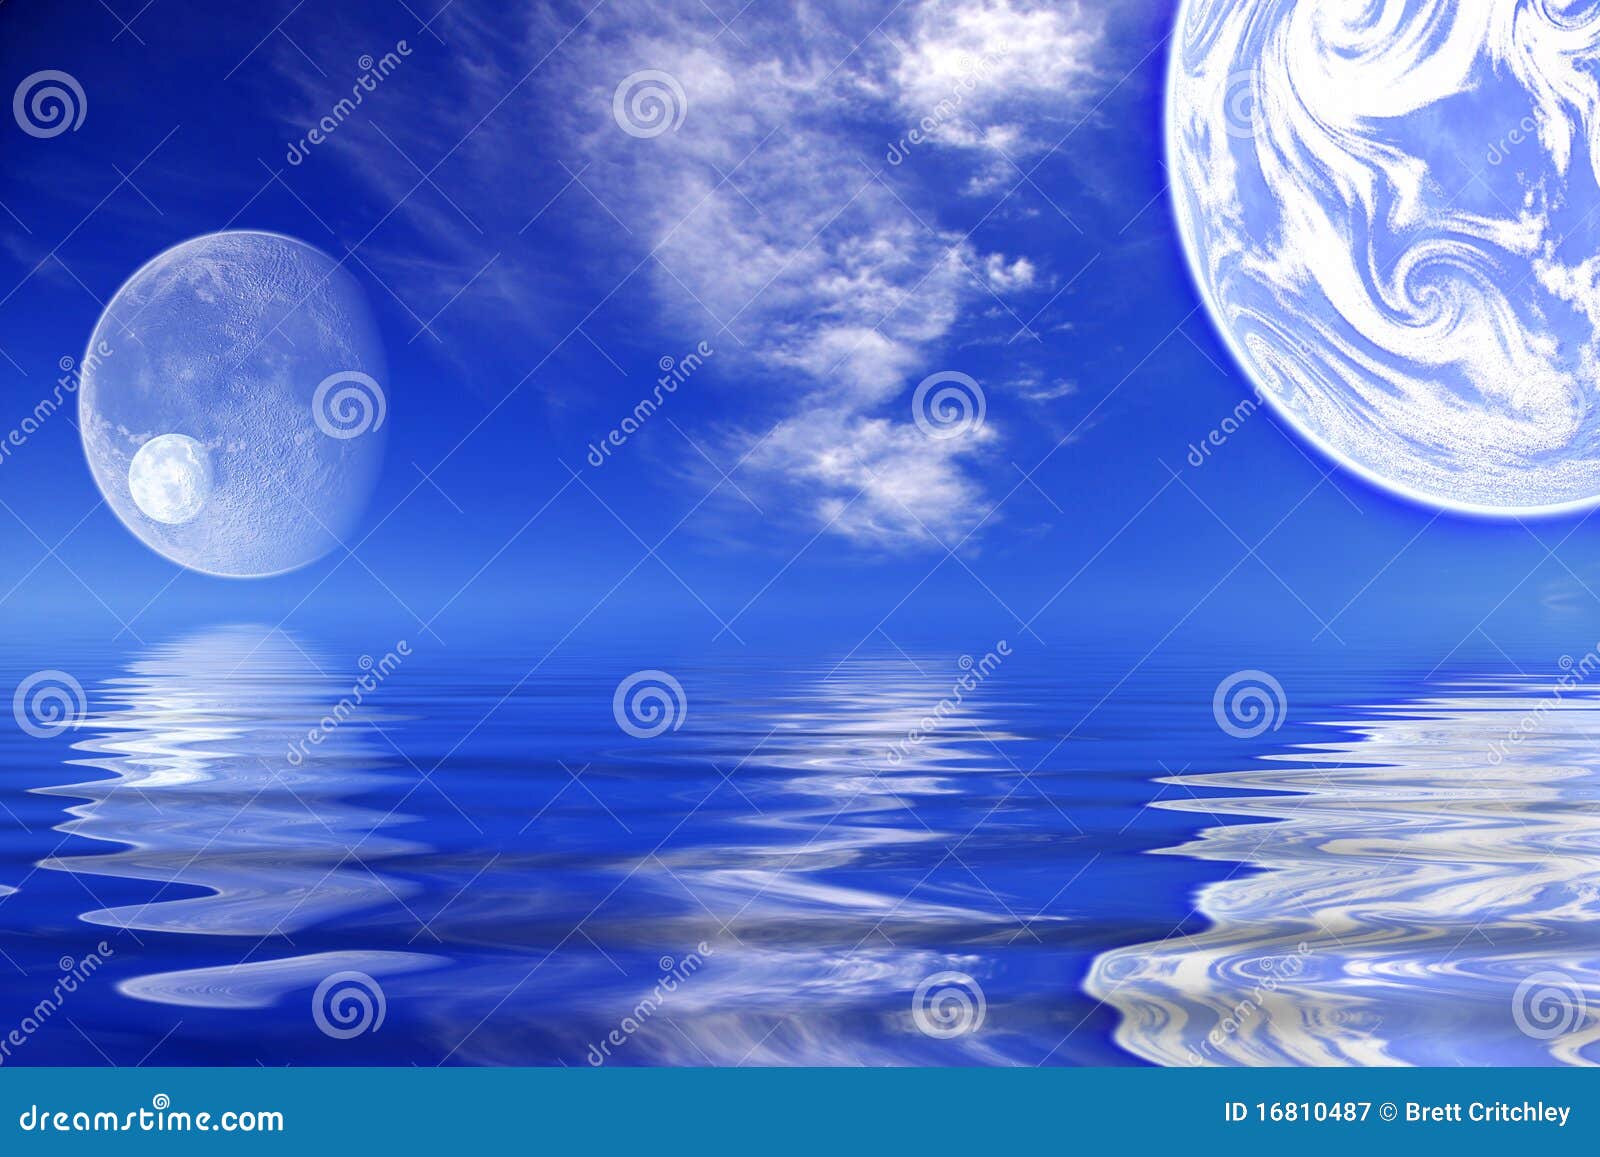 planets / worlds water